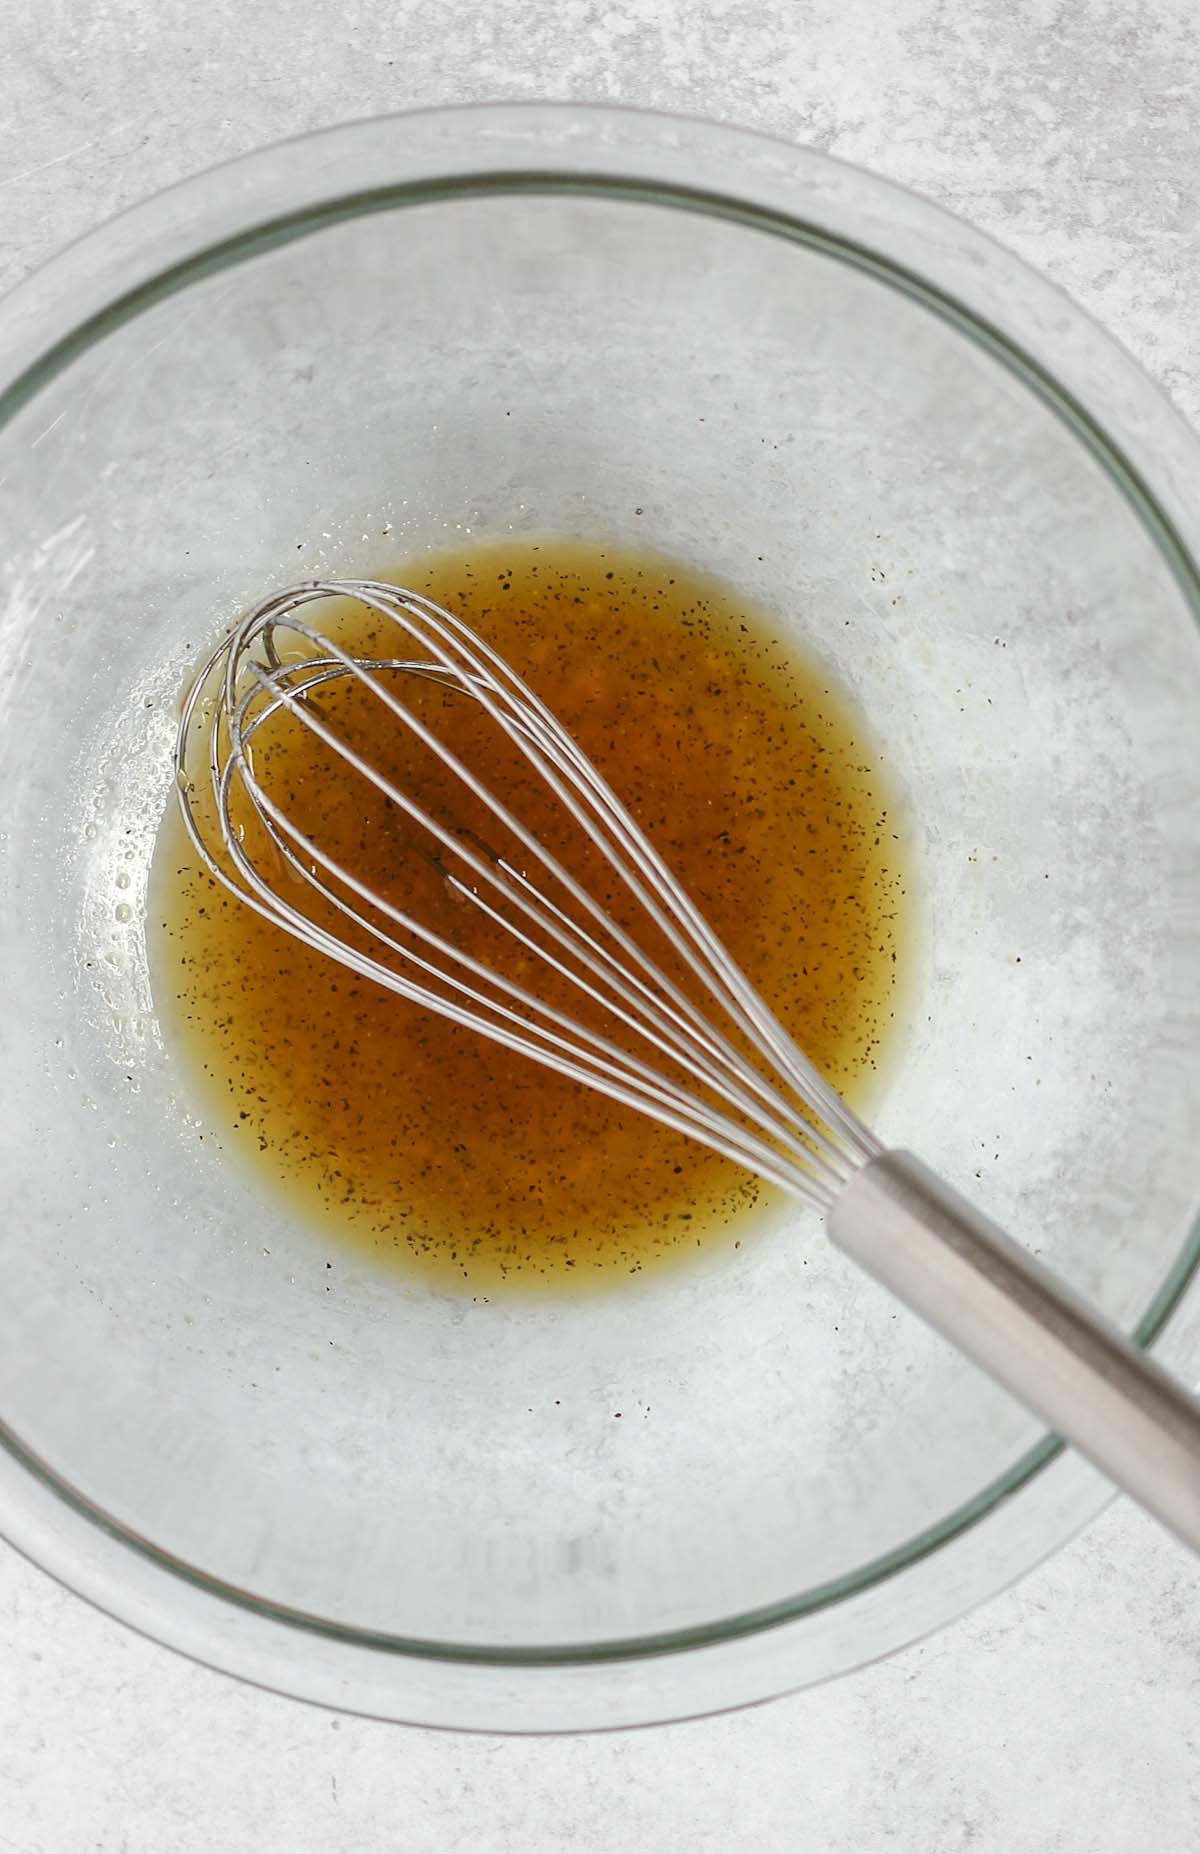 Wire whisk mixing honey marinade in a small glass mixing bowl.